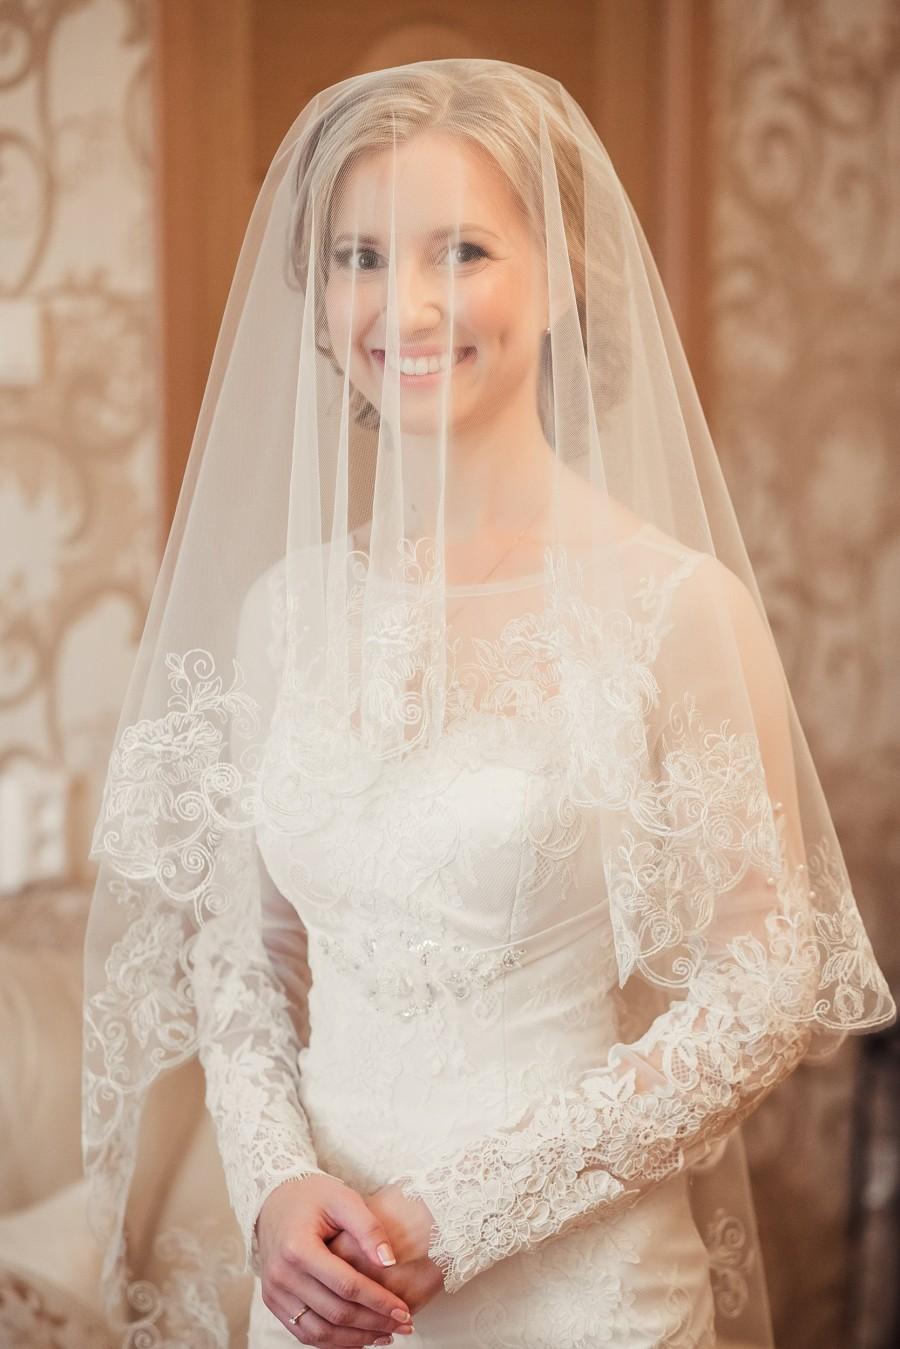 Mariage - Wedding veil with flowers, 2 tier veil with embroidery, Lace veil with comb, Long veil, Fingertip veil, Chapel veil, Cathedral veil